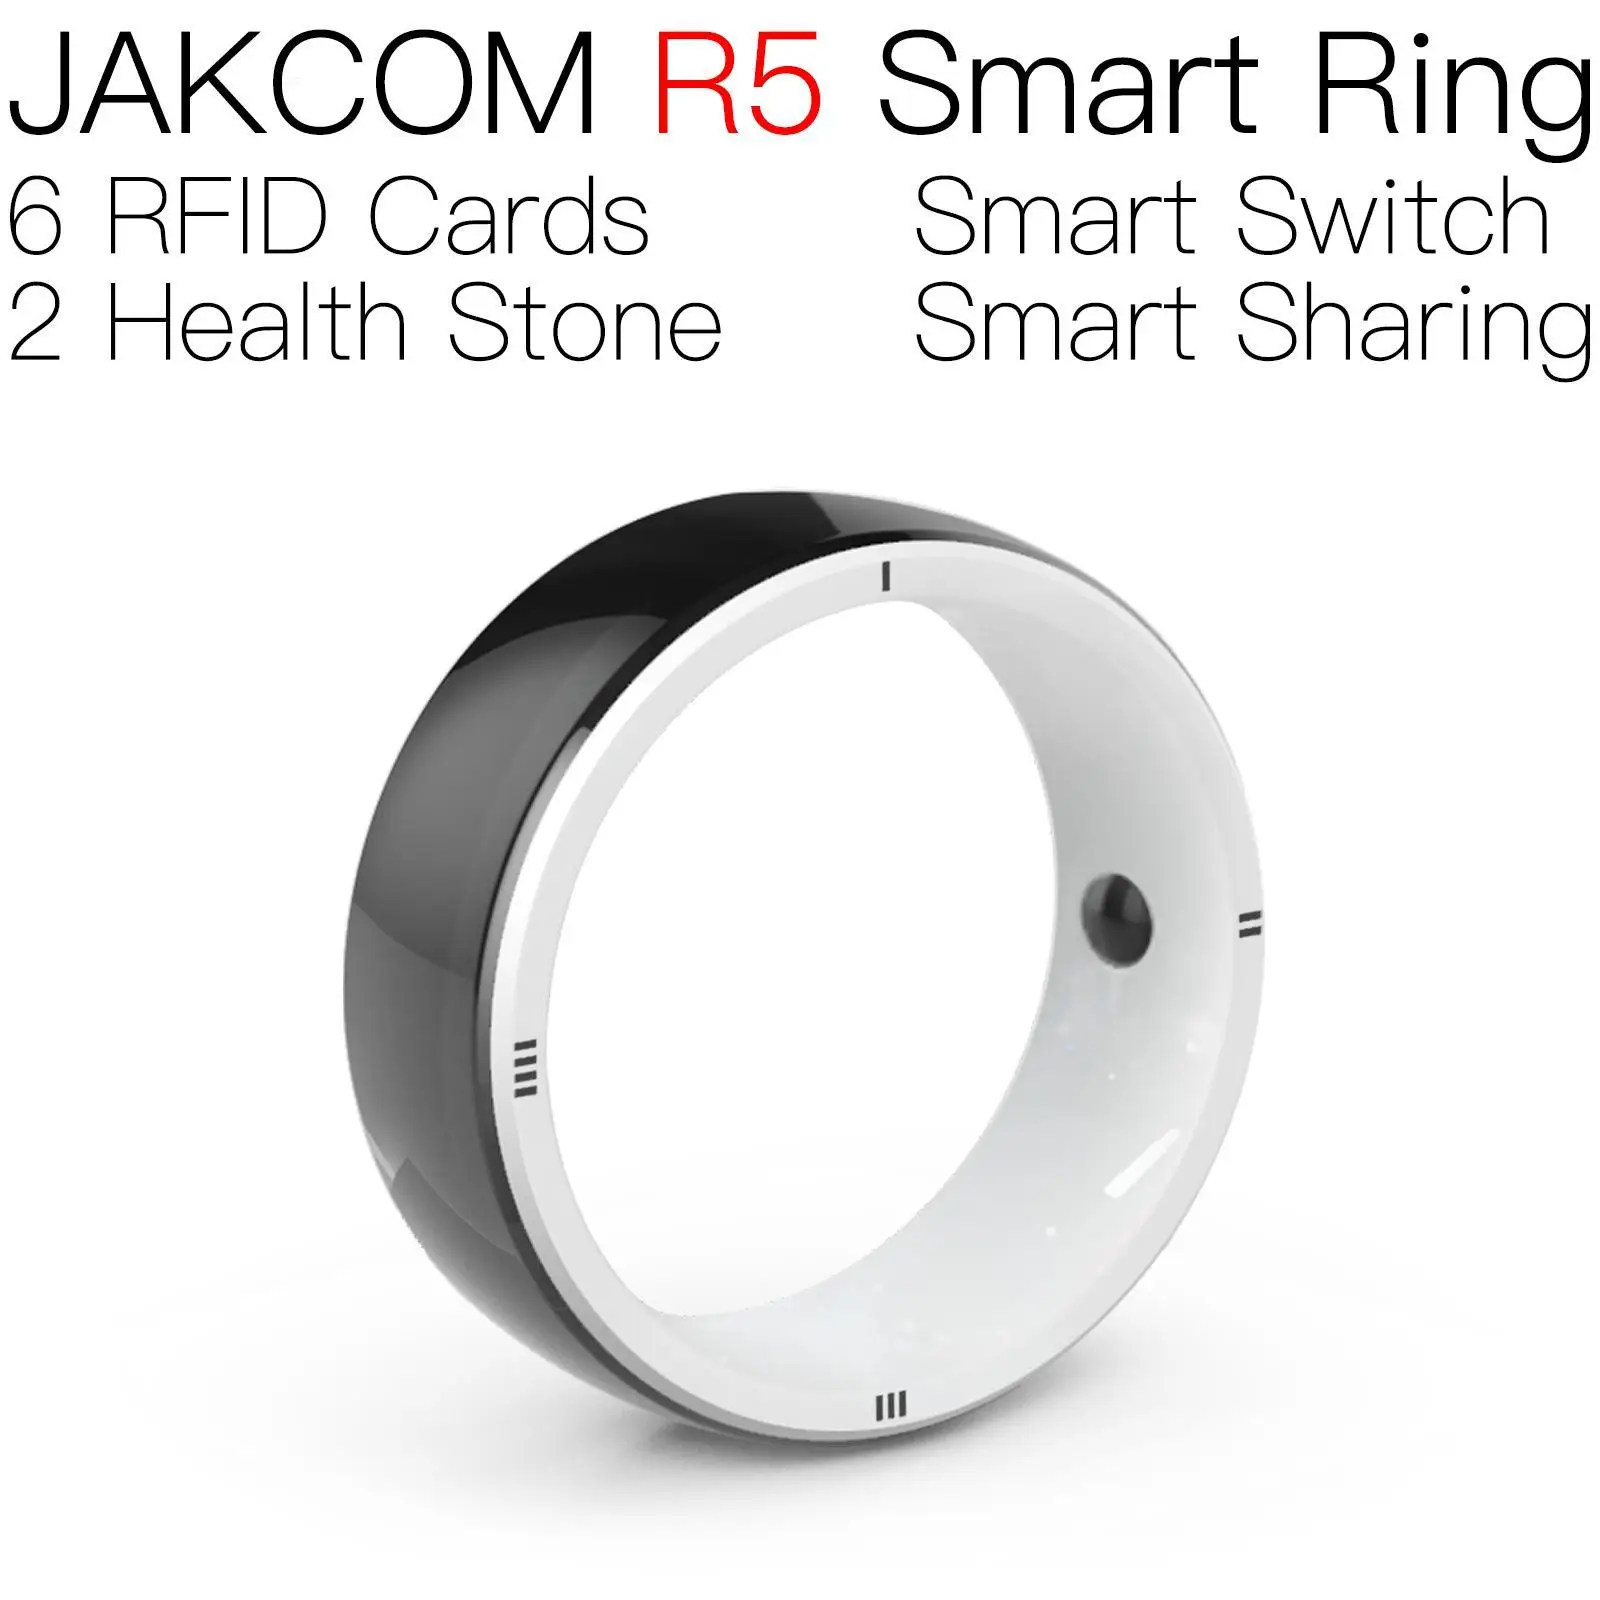 

JAKCOM R5 Smart Ring For men women animal nfc game biometric proximity card access control s010 rfid stickers smart read and